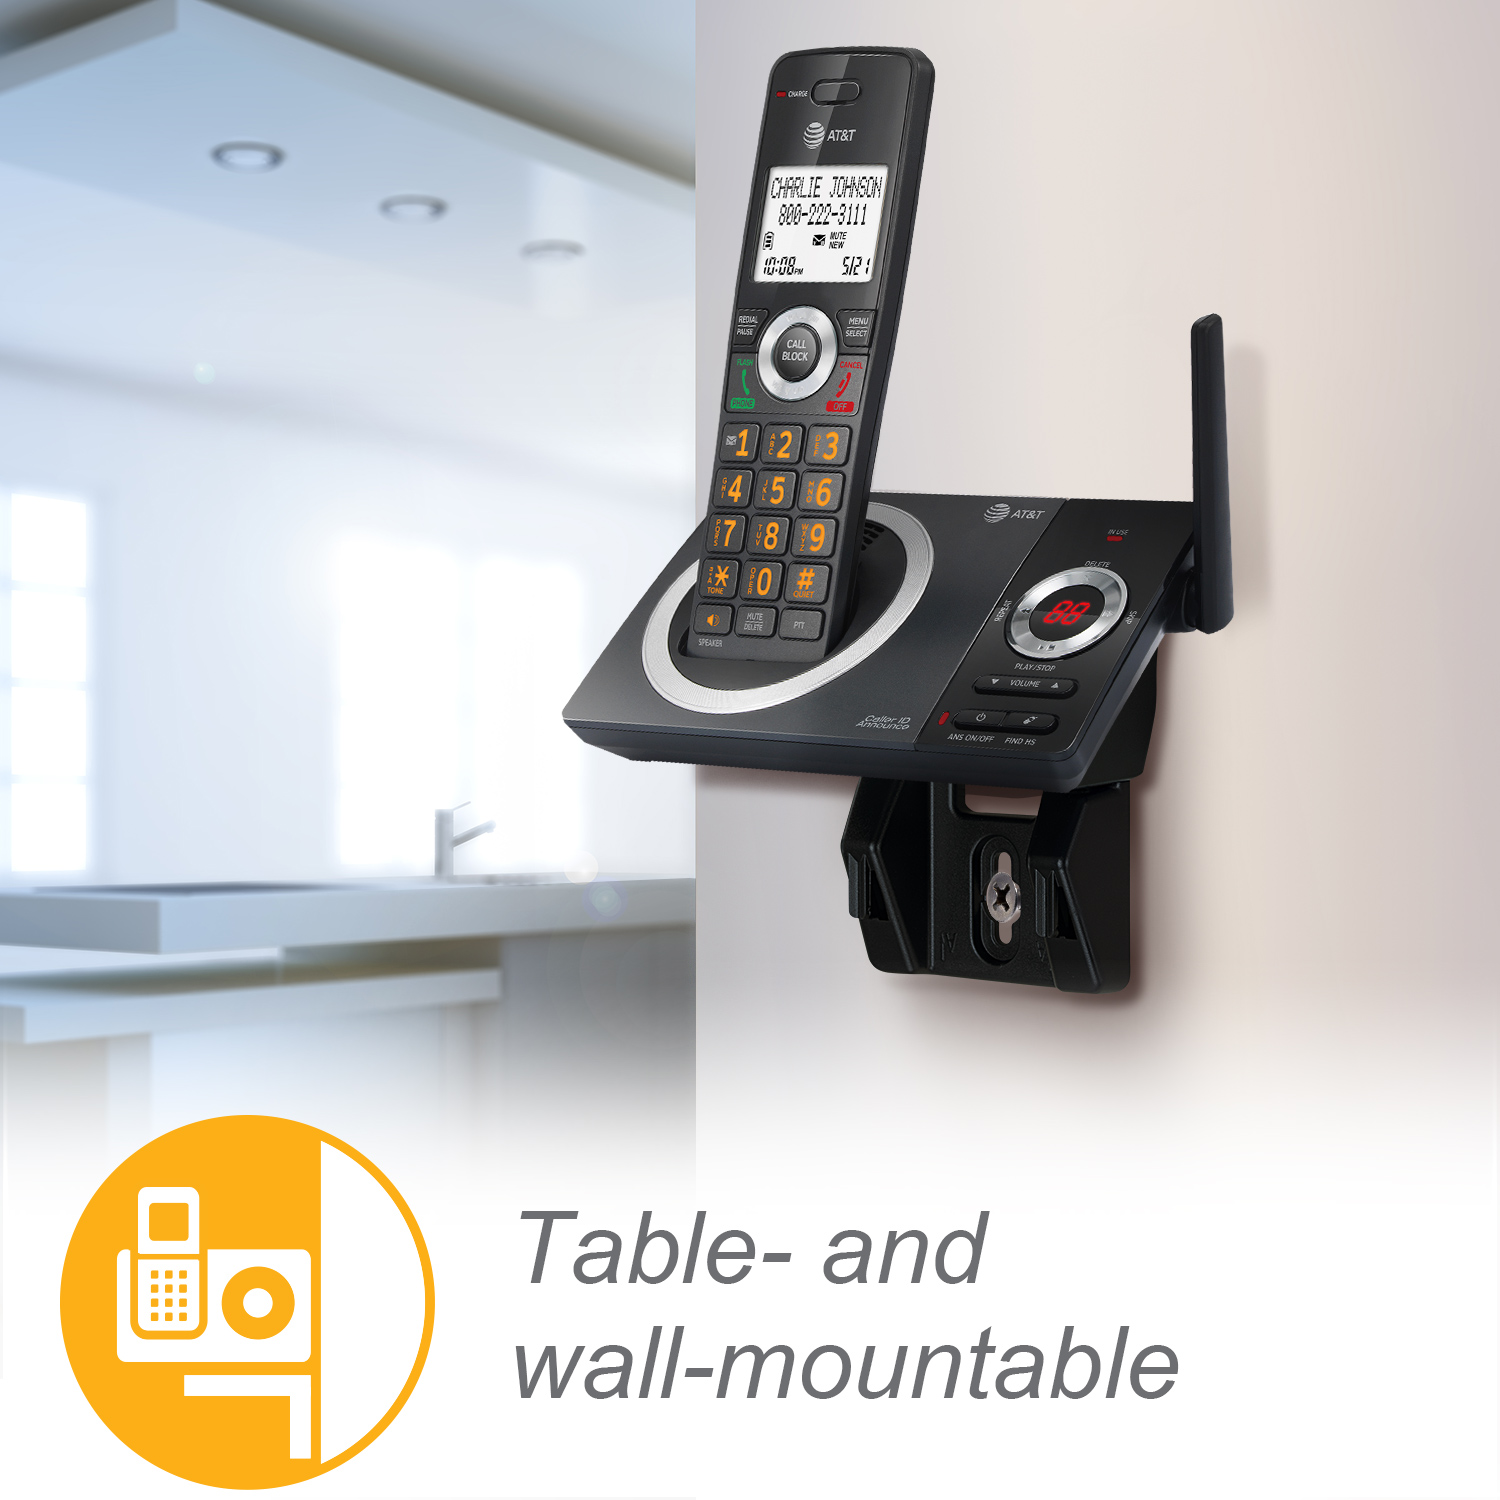 3-Handset Expandable Cordless Phone with Unsurpassed Range, Smart Call Blocker and Answering System - view 12